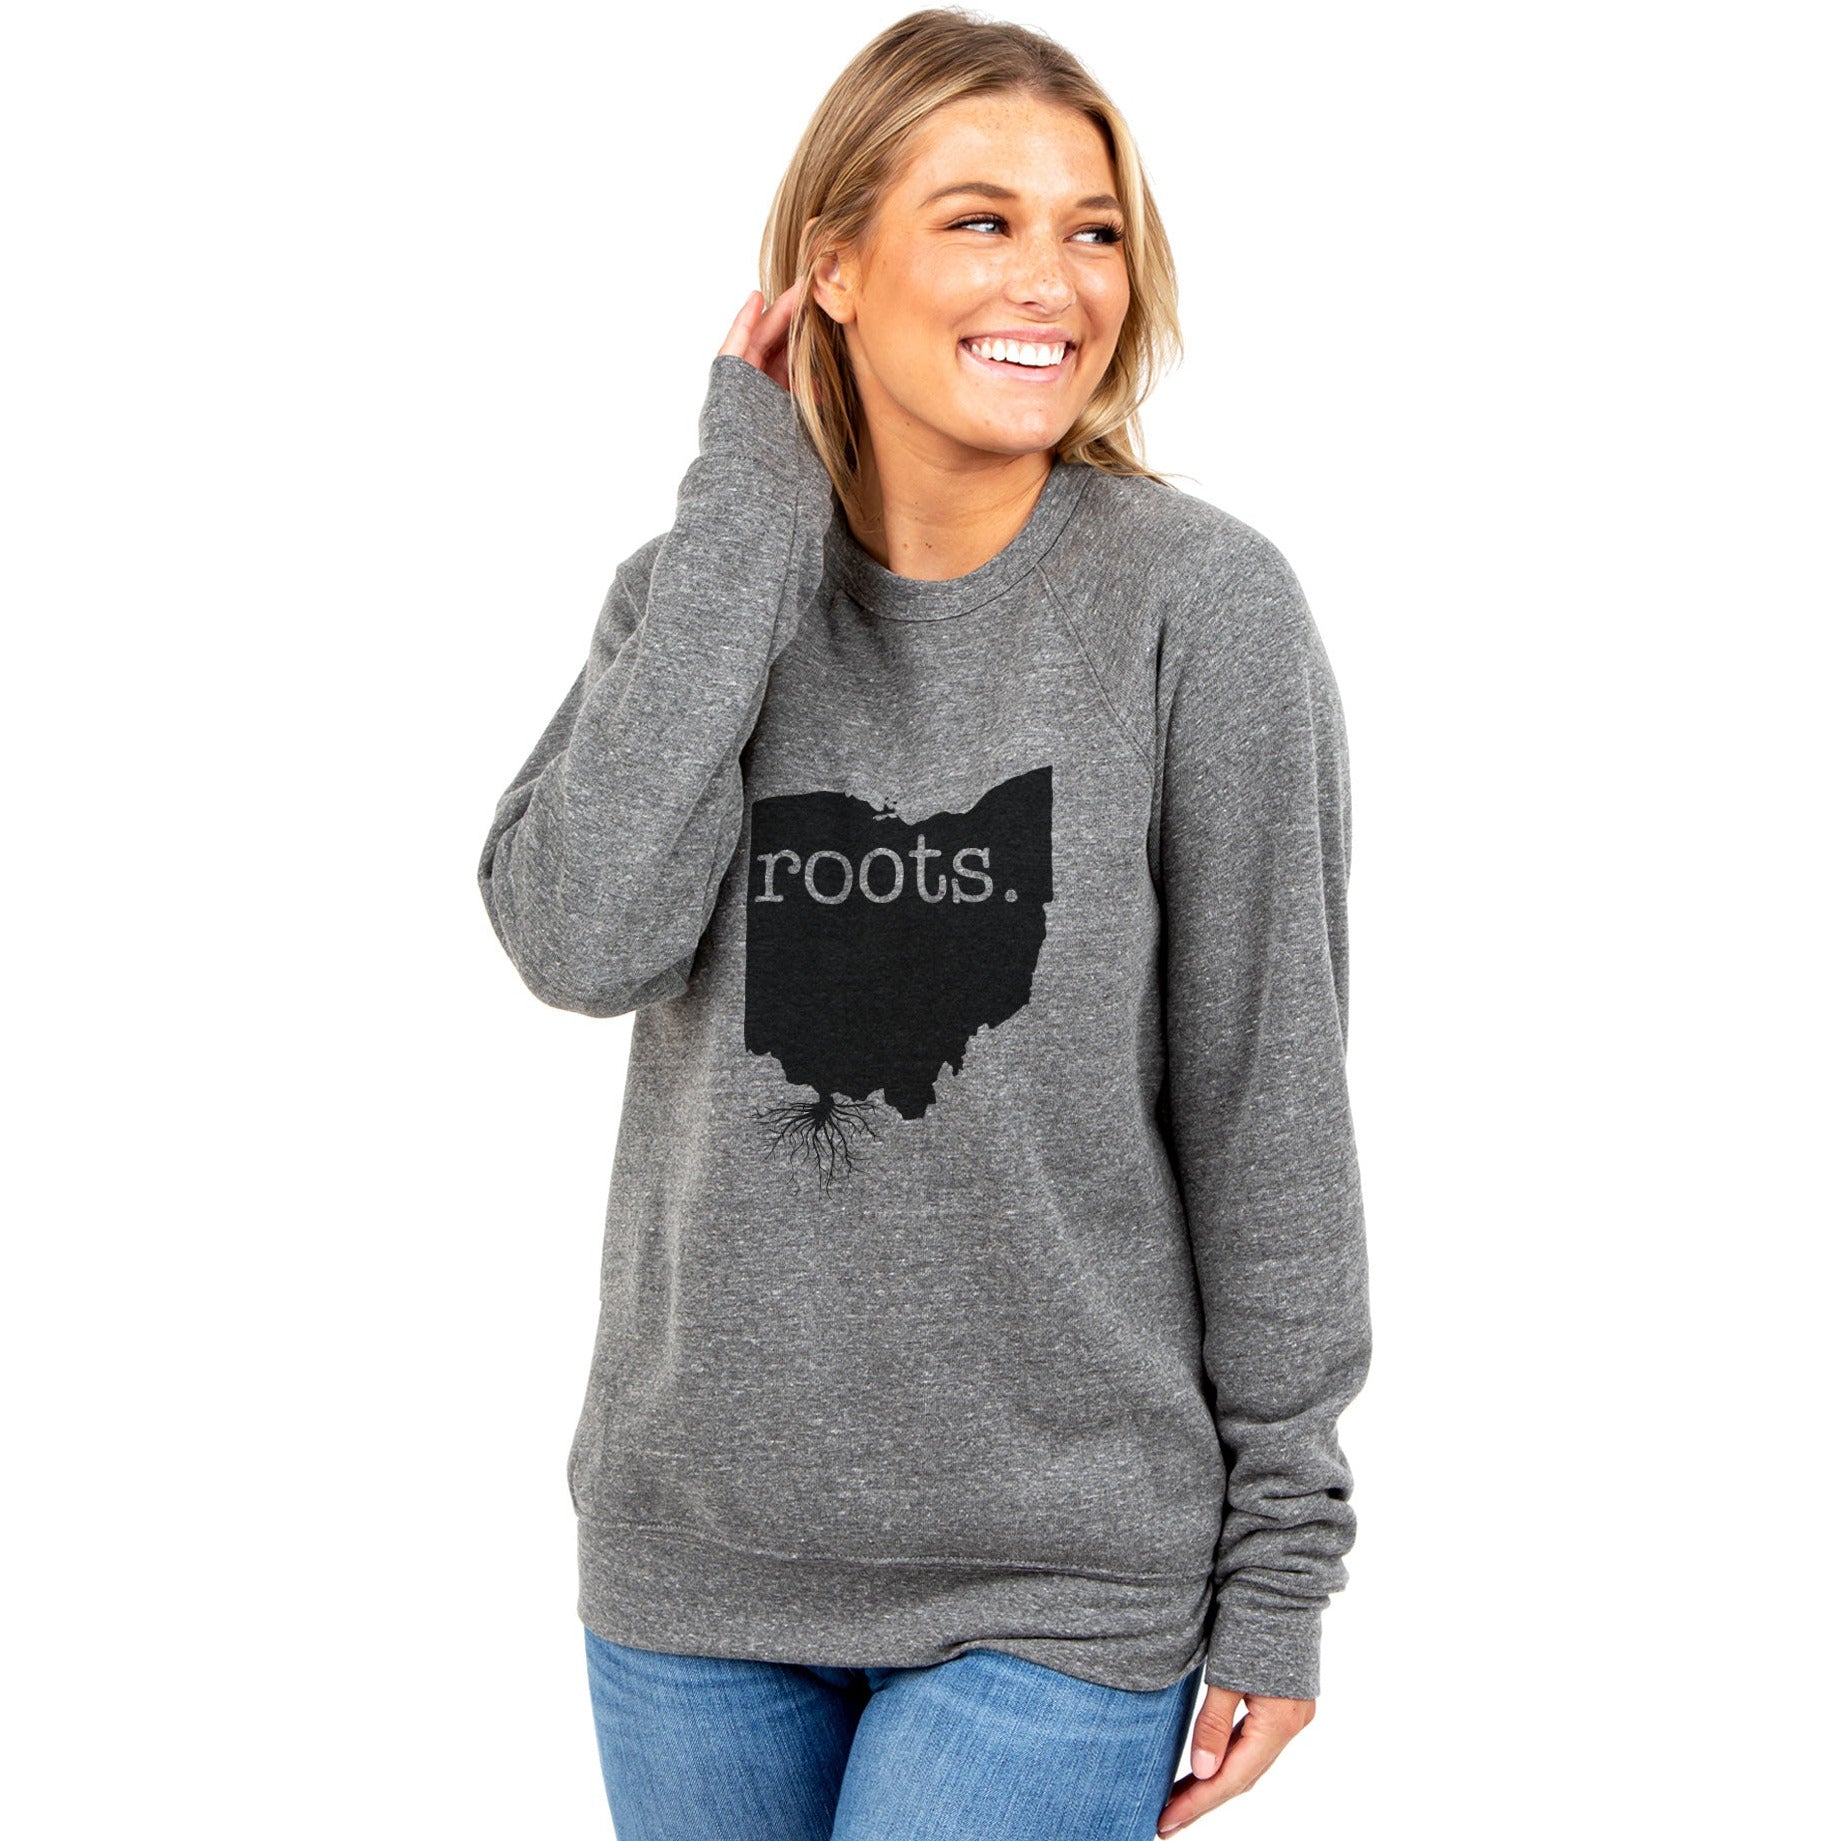 Roots State Ohio - Stories You Can Wear